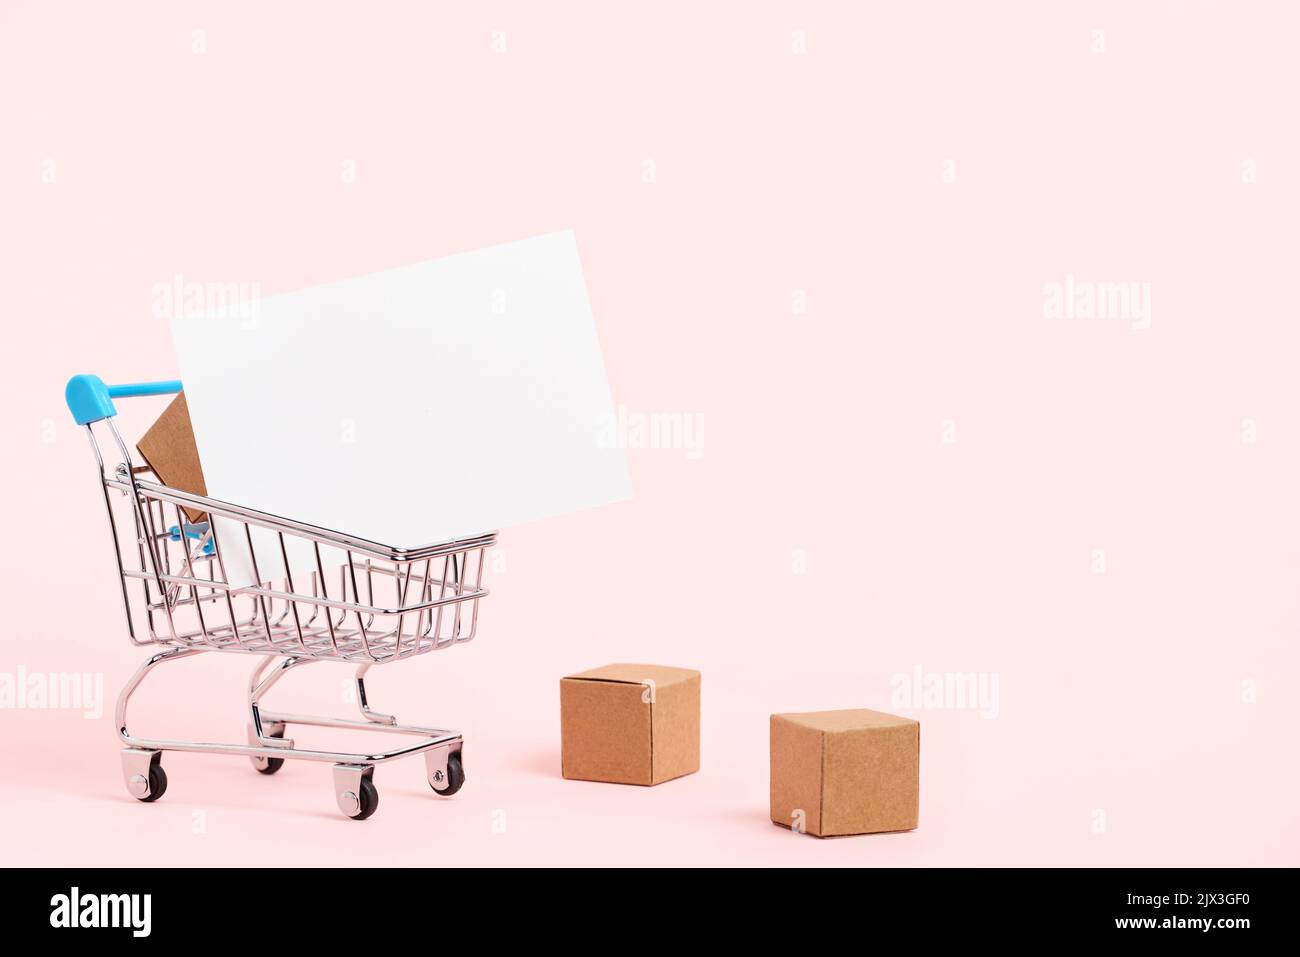 Shopping cart with cardboard boxes and a blank white paper poster on a pastel pink background. Minimalist design with copy space. Concepts: market dea Stock Photo